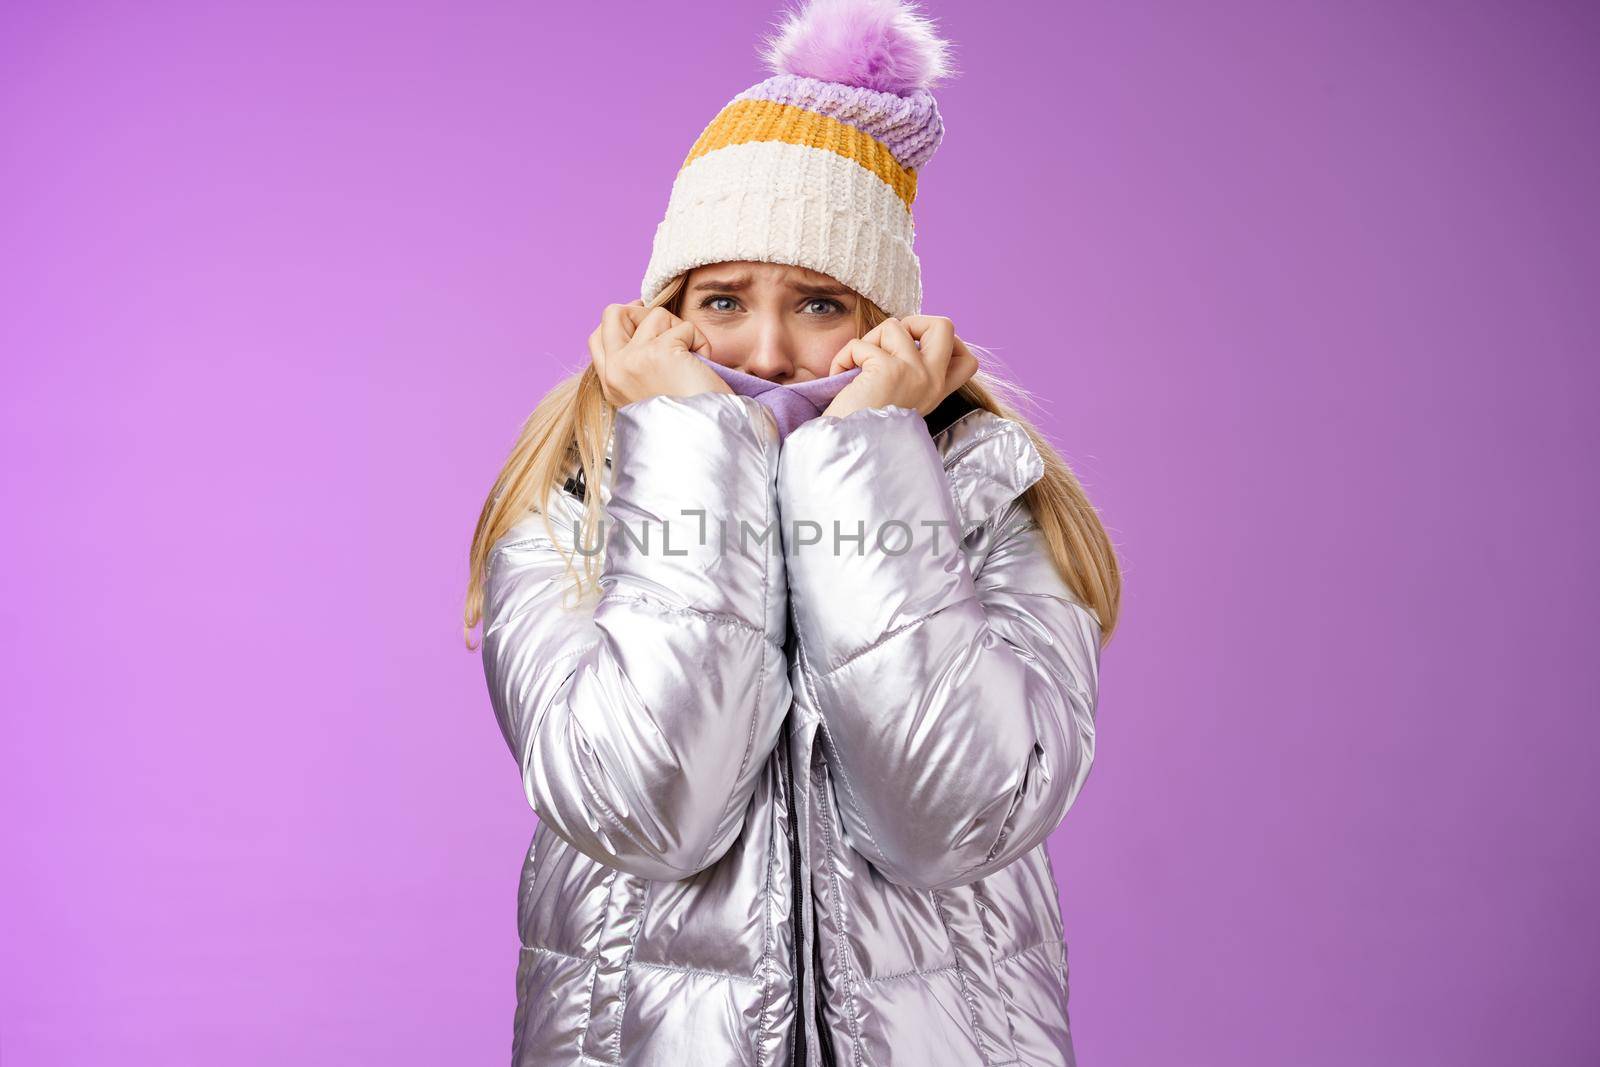 Scared afraid insecure coward girl in cute hat glittering shiny jacket pull cloth face frightened frowning stooping look concerned terrified scared death, standing purple background timid by Benzoix